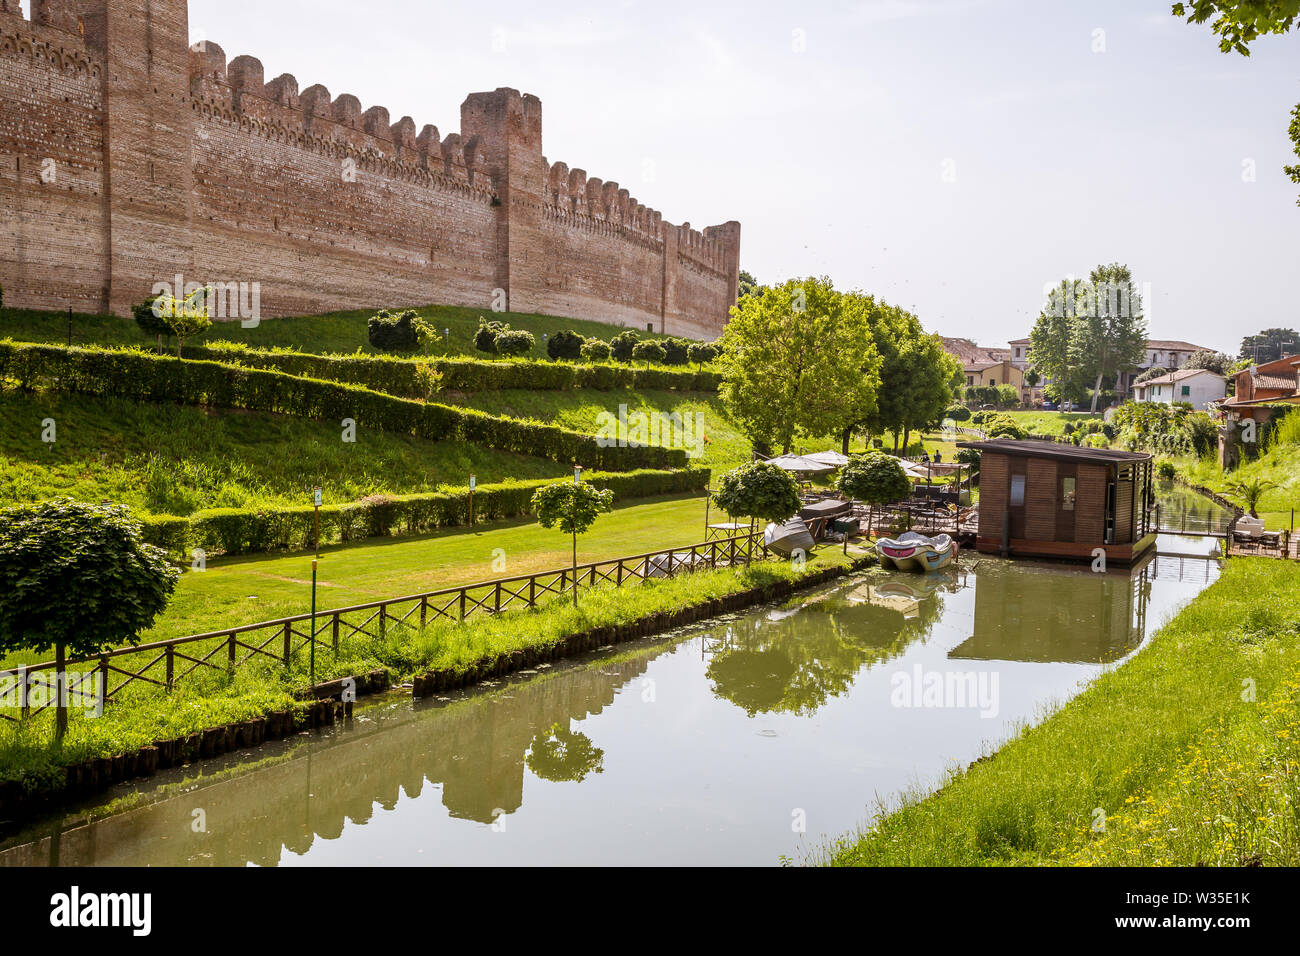 View of the medieval walls and moat of the city of Cittadella